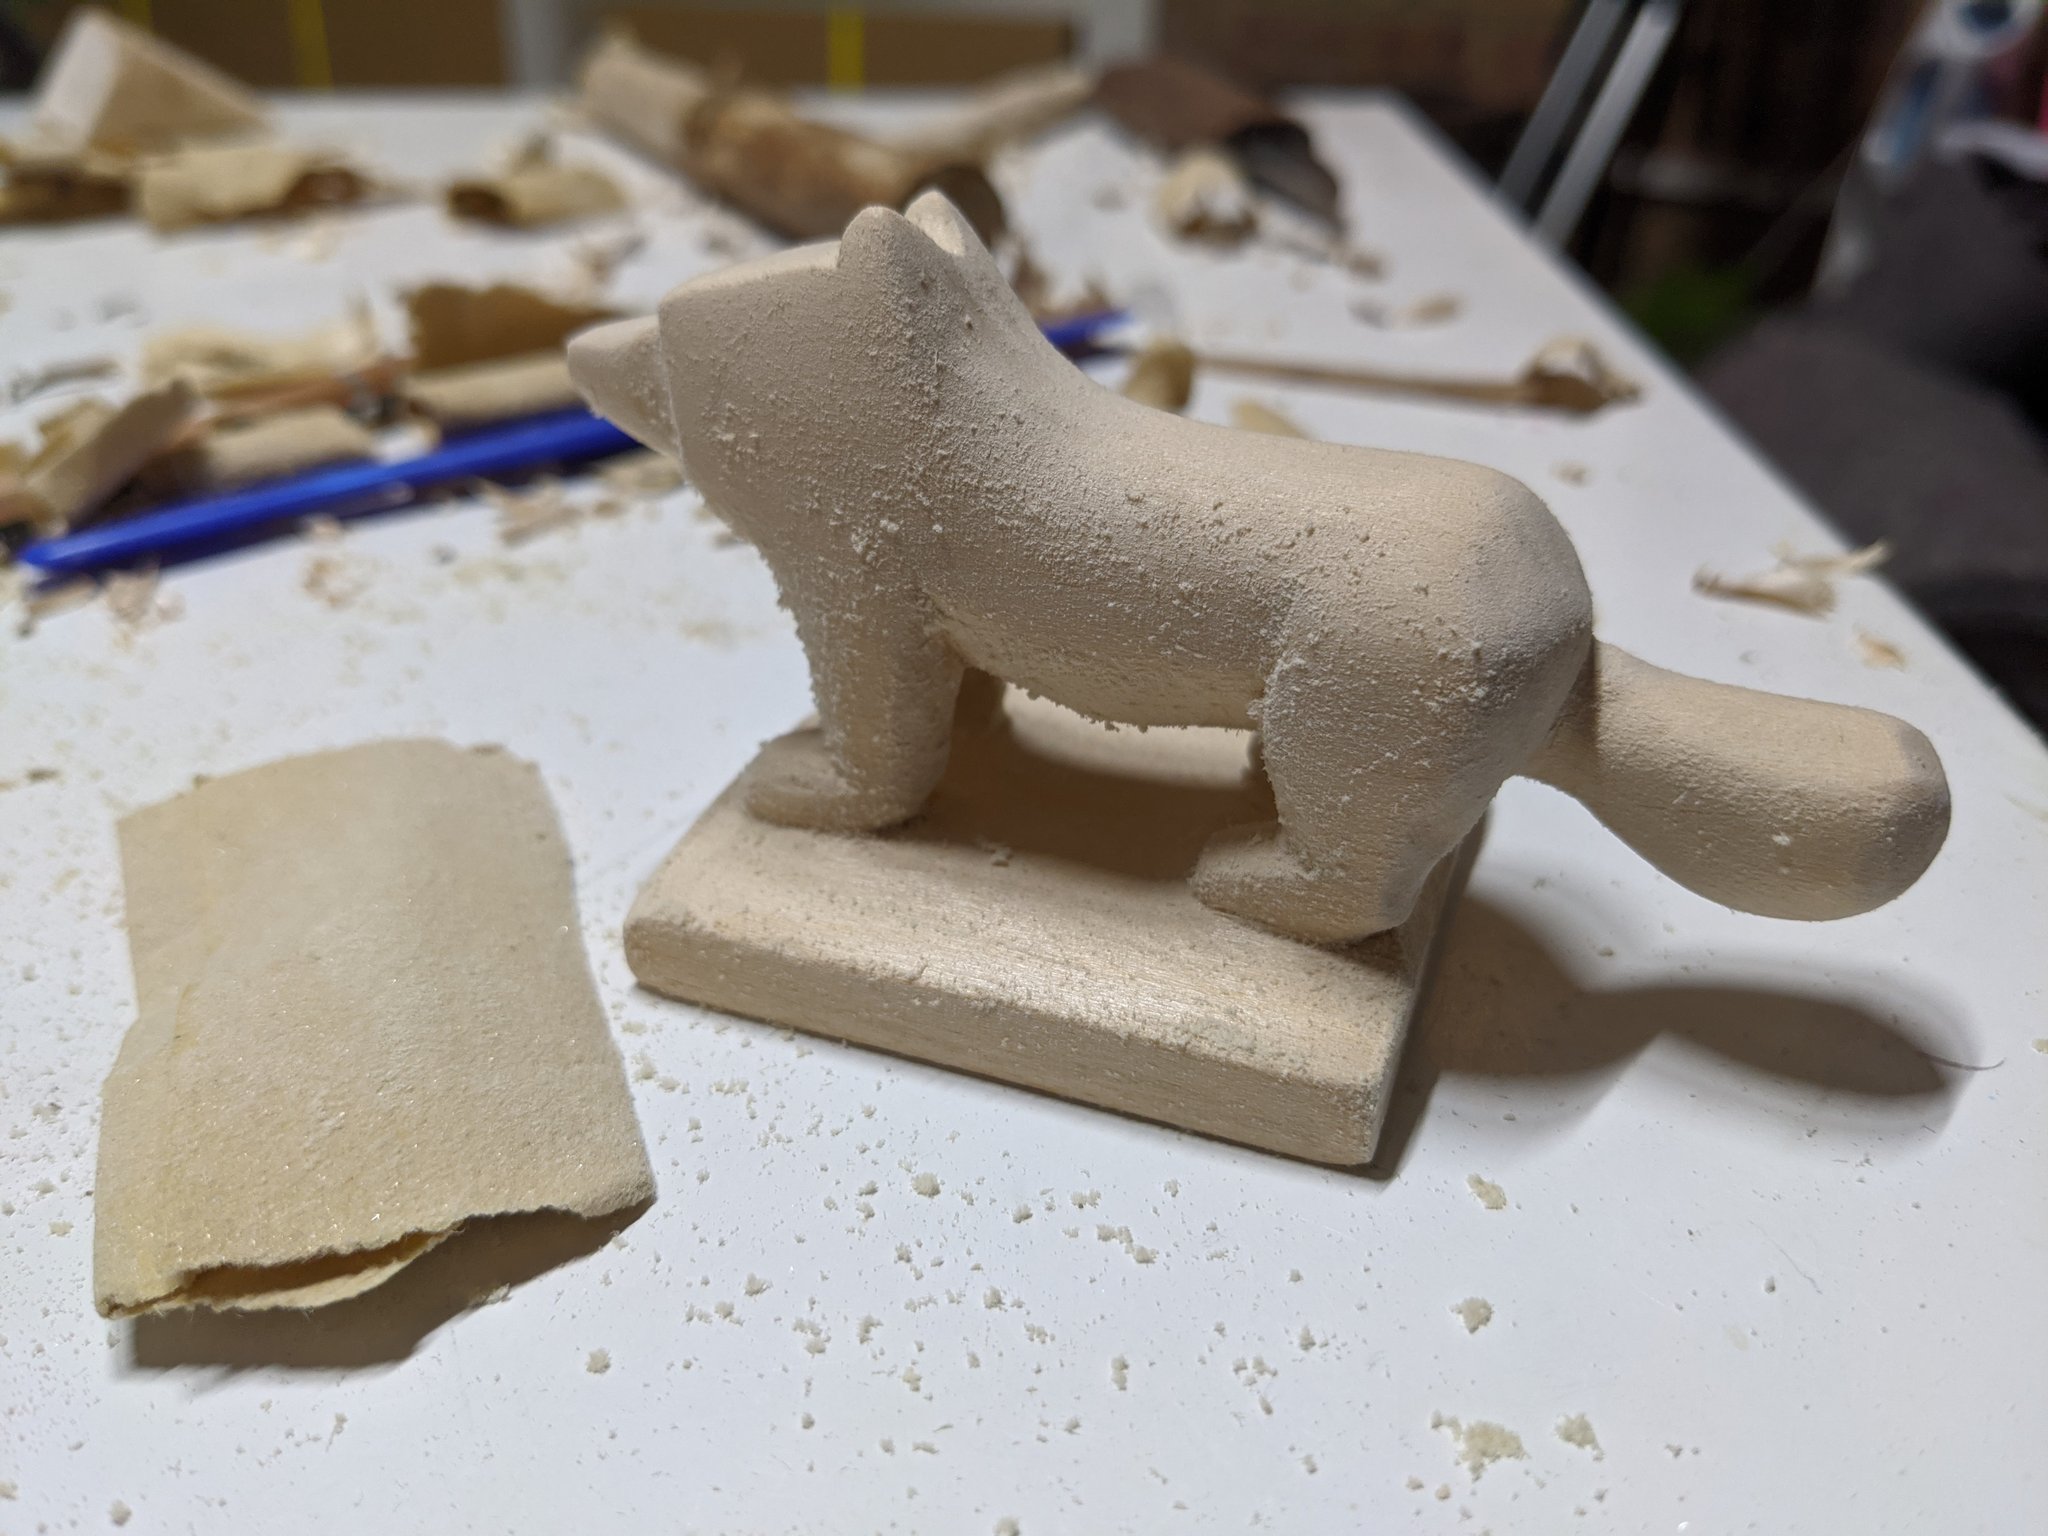 Sandpaper next to the dog, with the dog covered in a soft fluff like appearance after being sanded